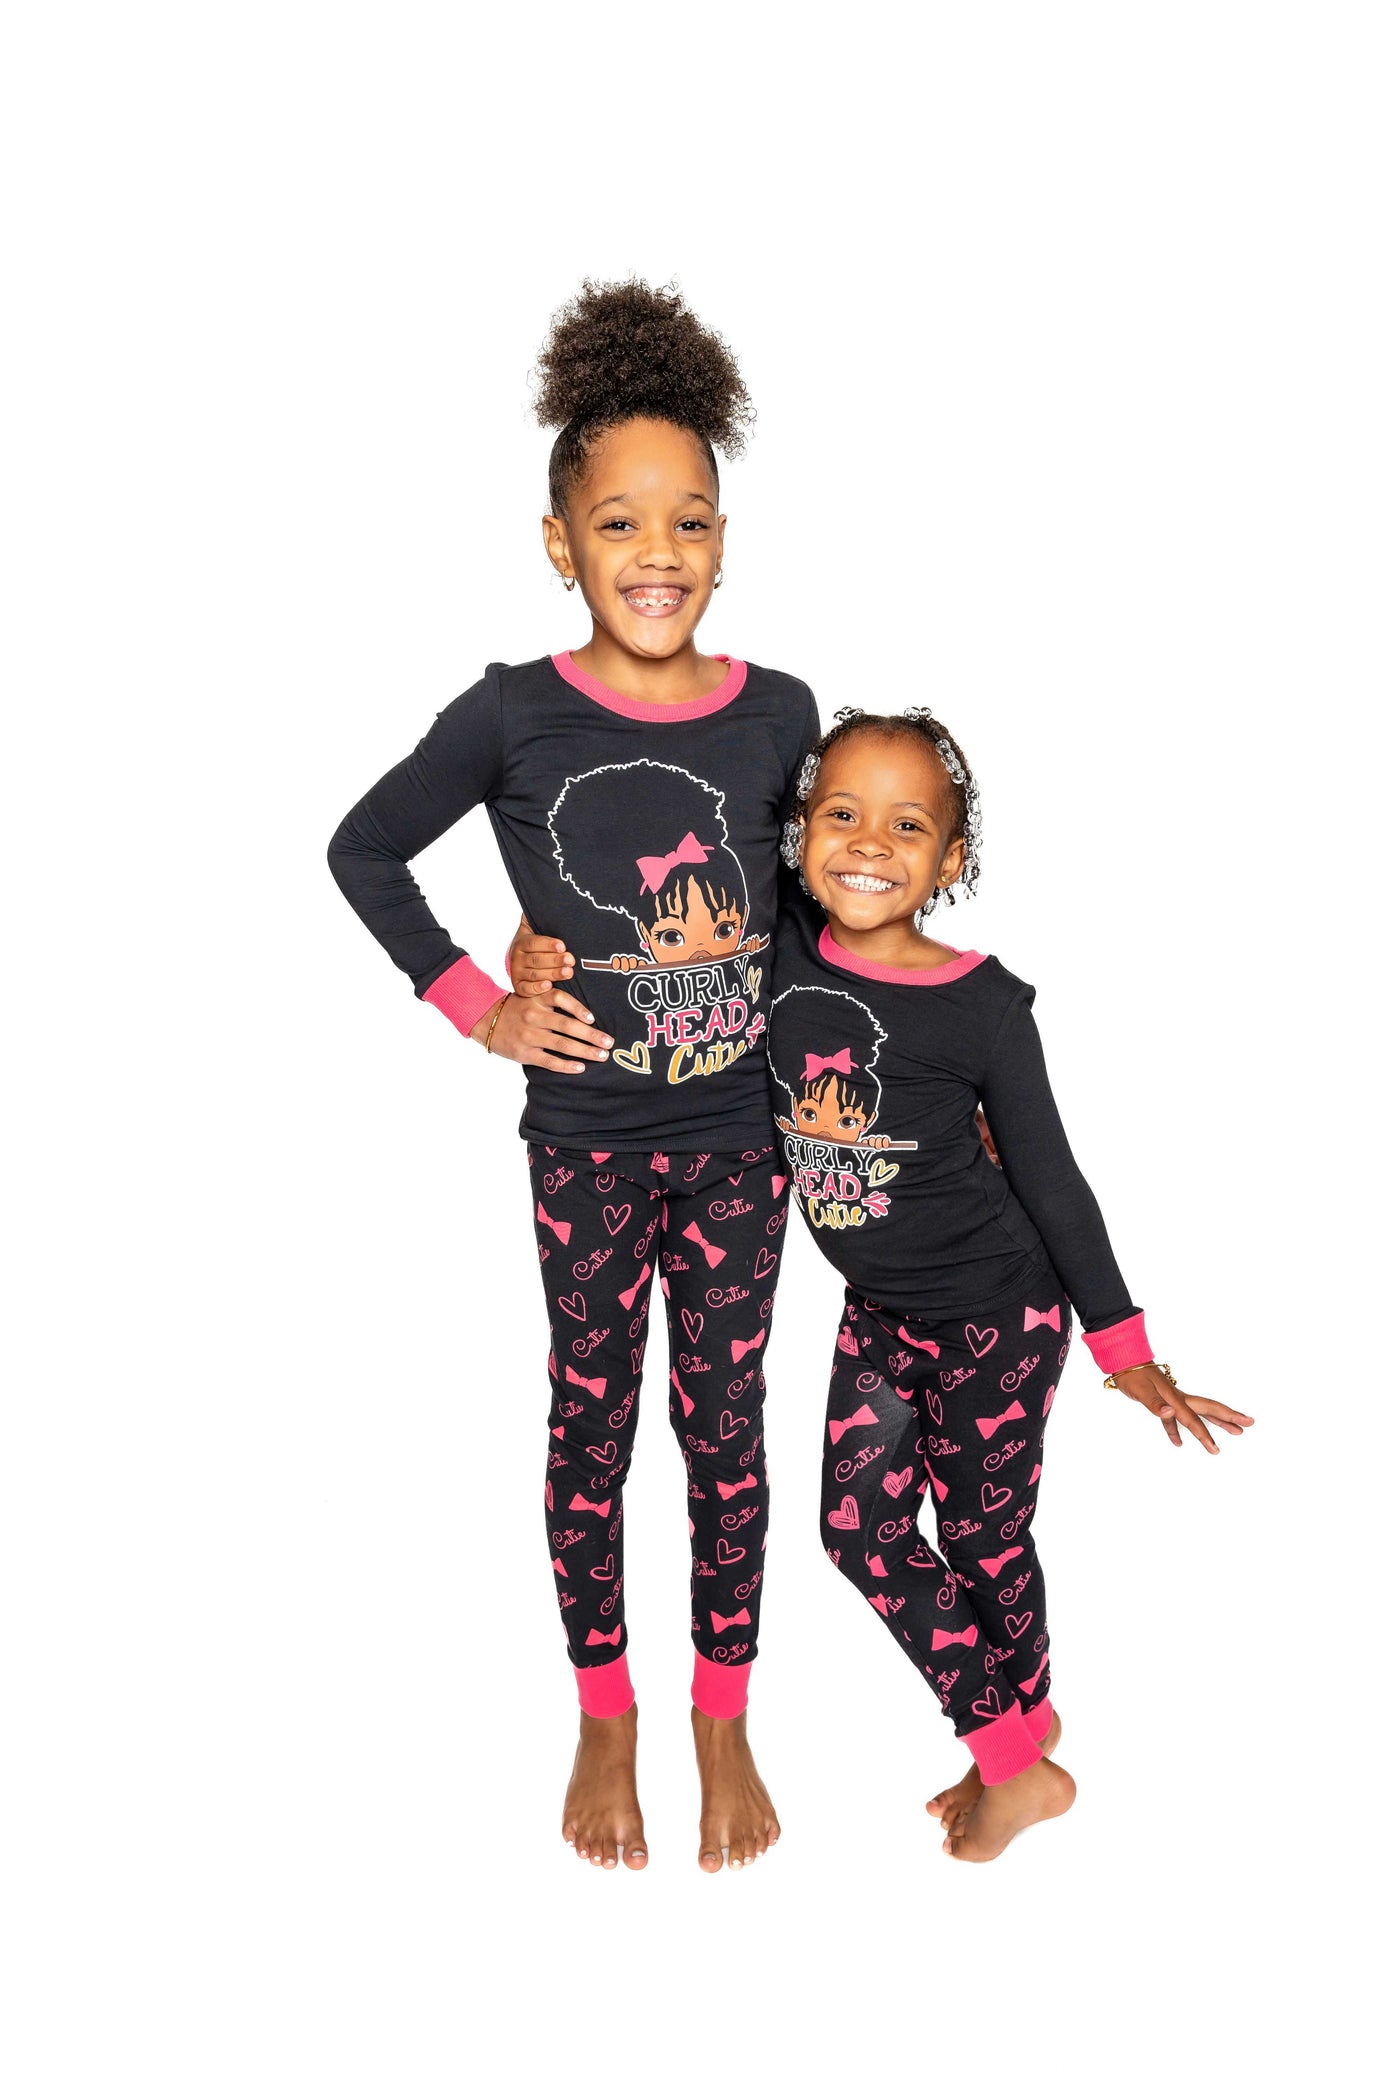 CURLY HEAD CUTIE HAIRSTYLES Snug Fit PAJAMA 2 PC SET SIZE TODDLER 2T - 14 BLACK